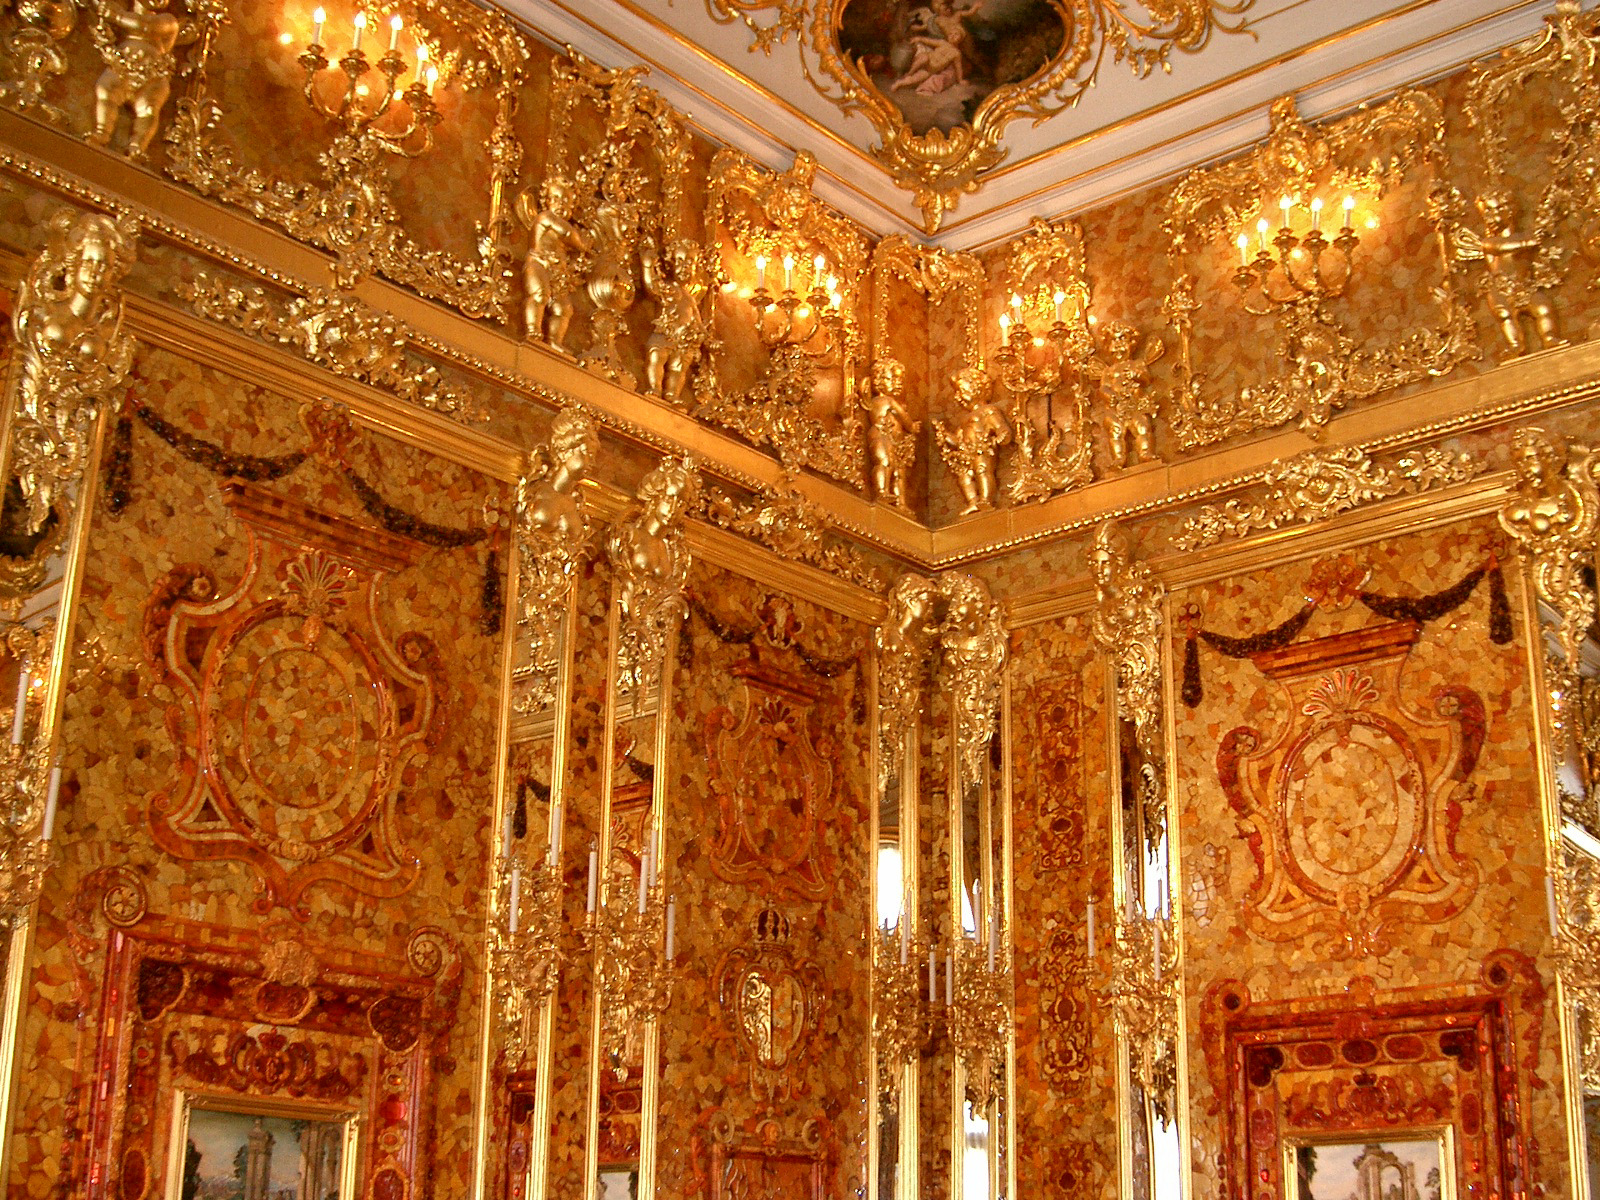 Interior shot of the Amber Room, by Wikimedia Commons user jeanyfan - Own work, Public Domain